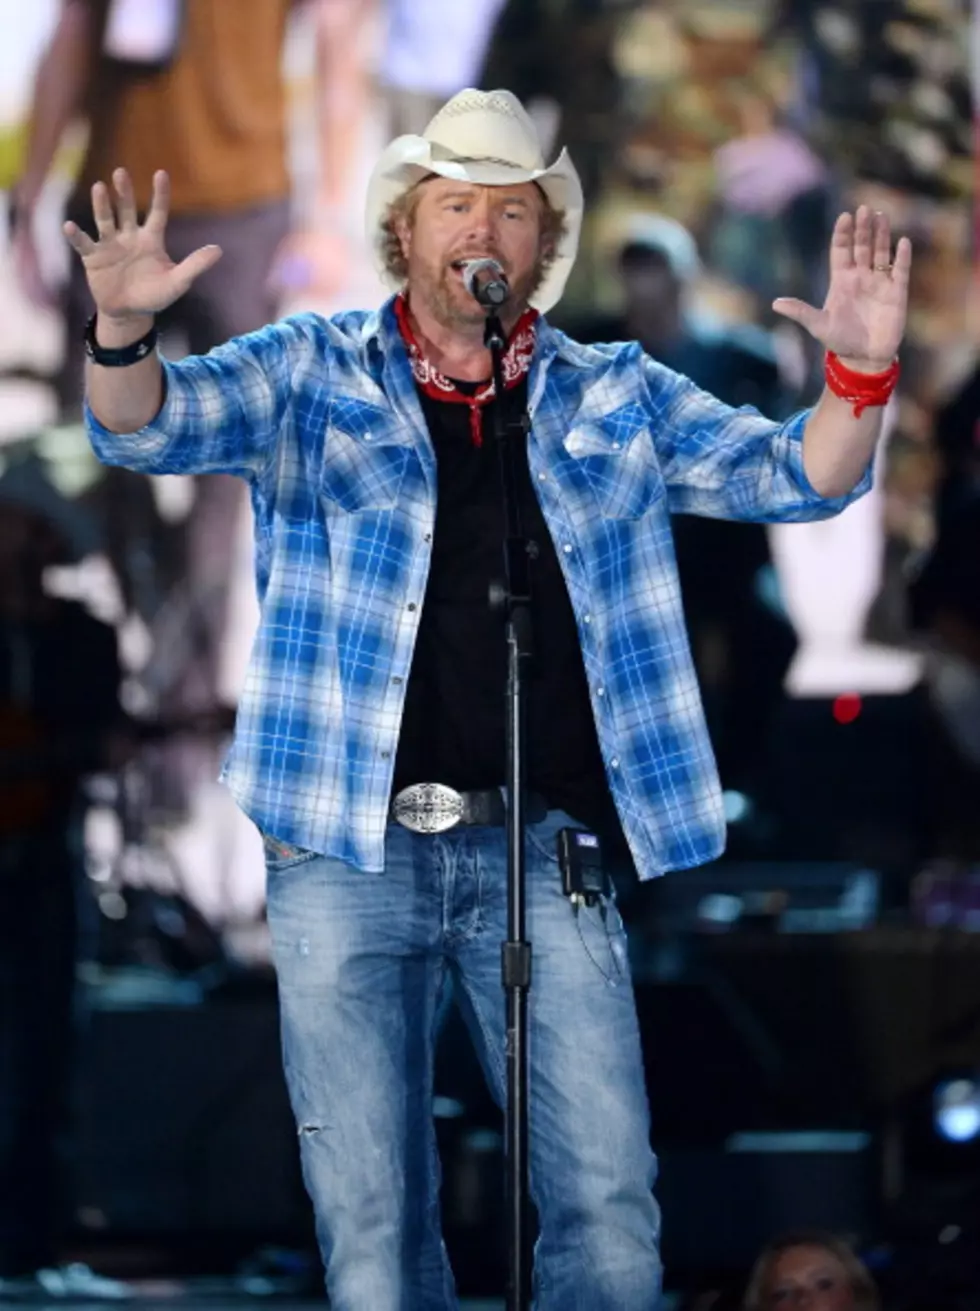 Toby Keith to Perform at Illinois Inaugural Concert Monday